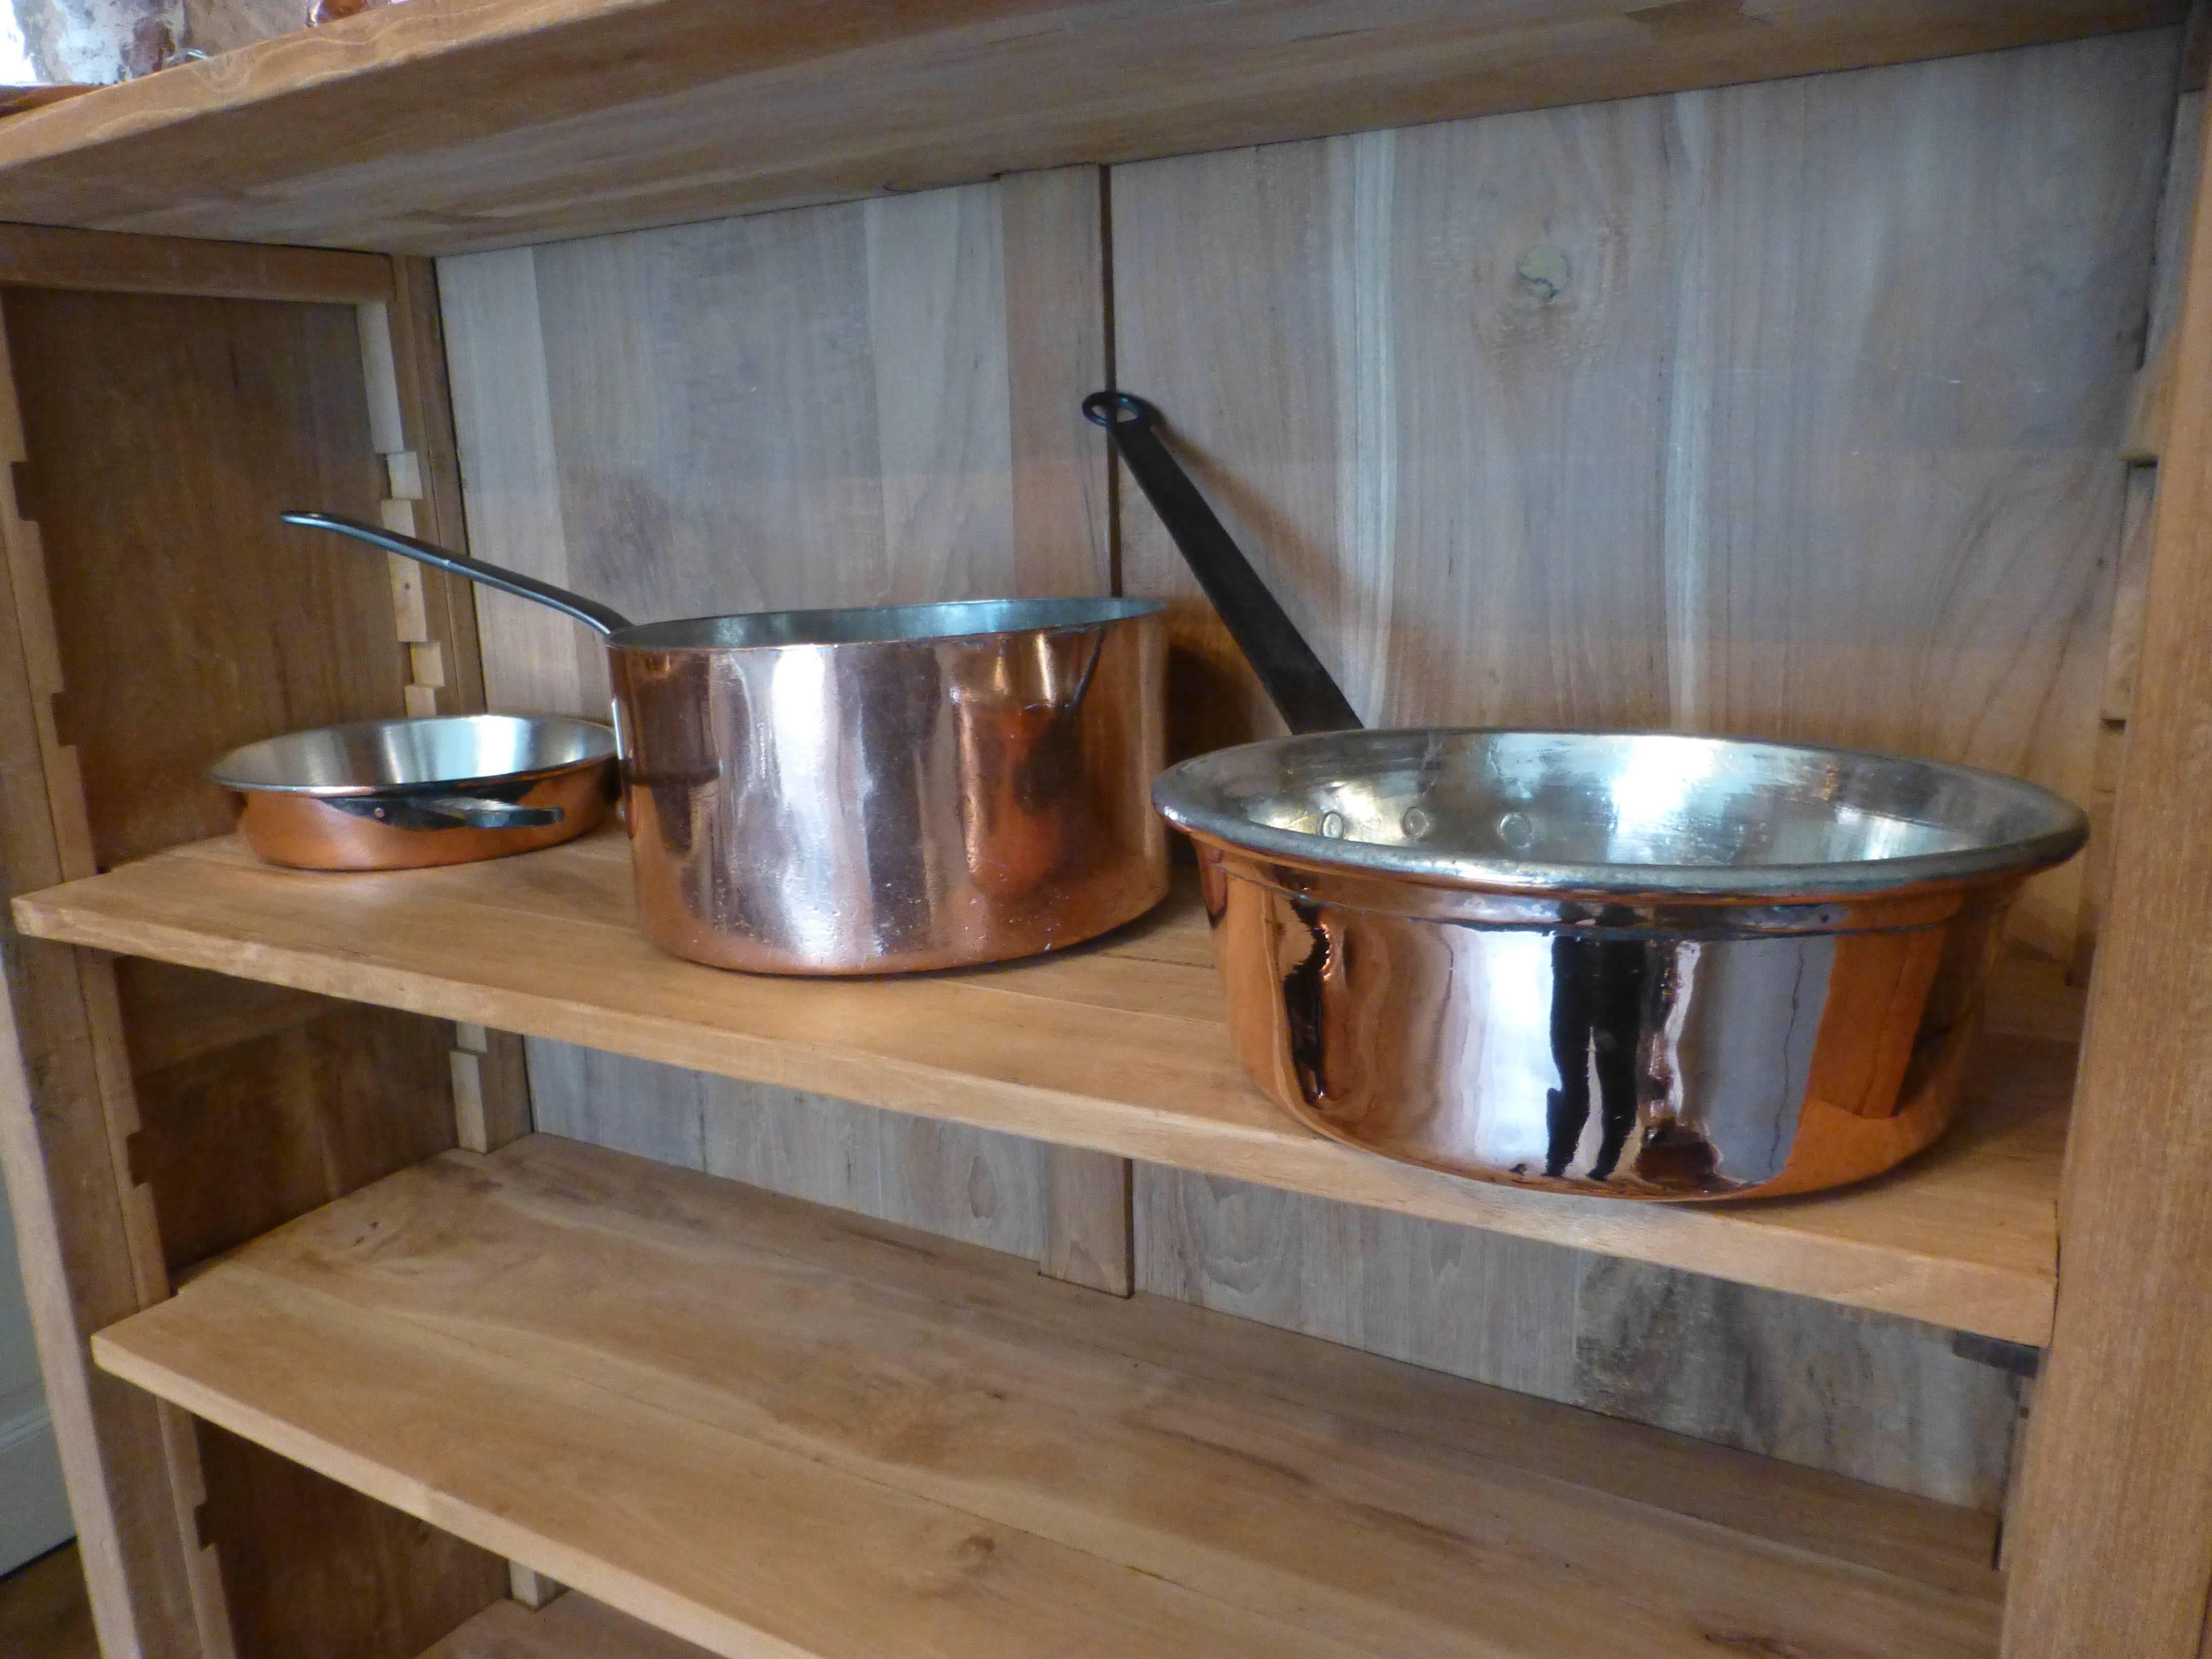 Set of Three Re-Tinned Copper Pots, Copper Pans 4